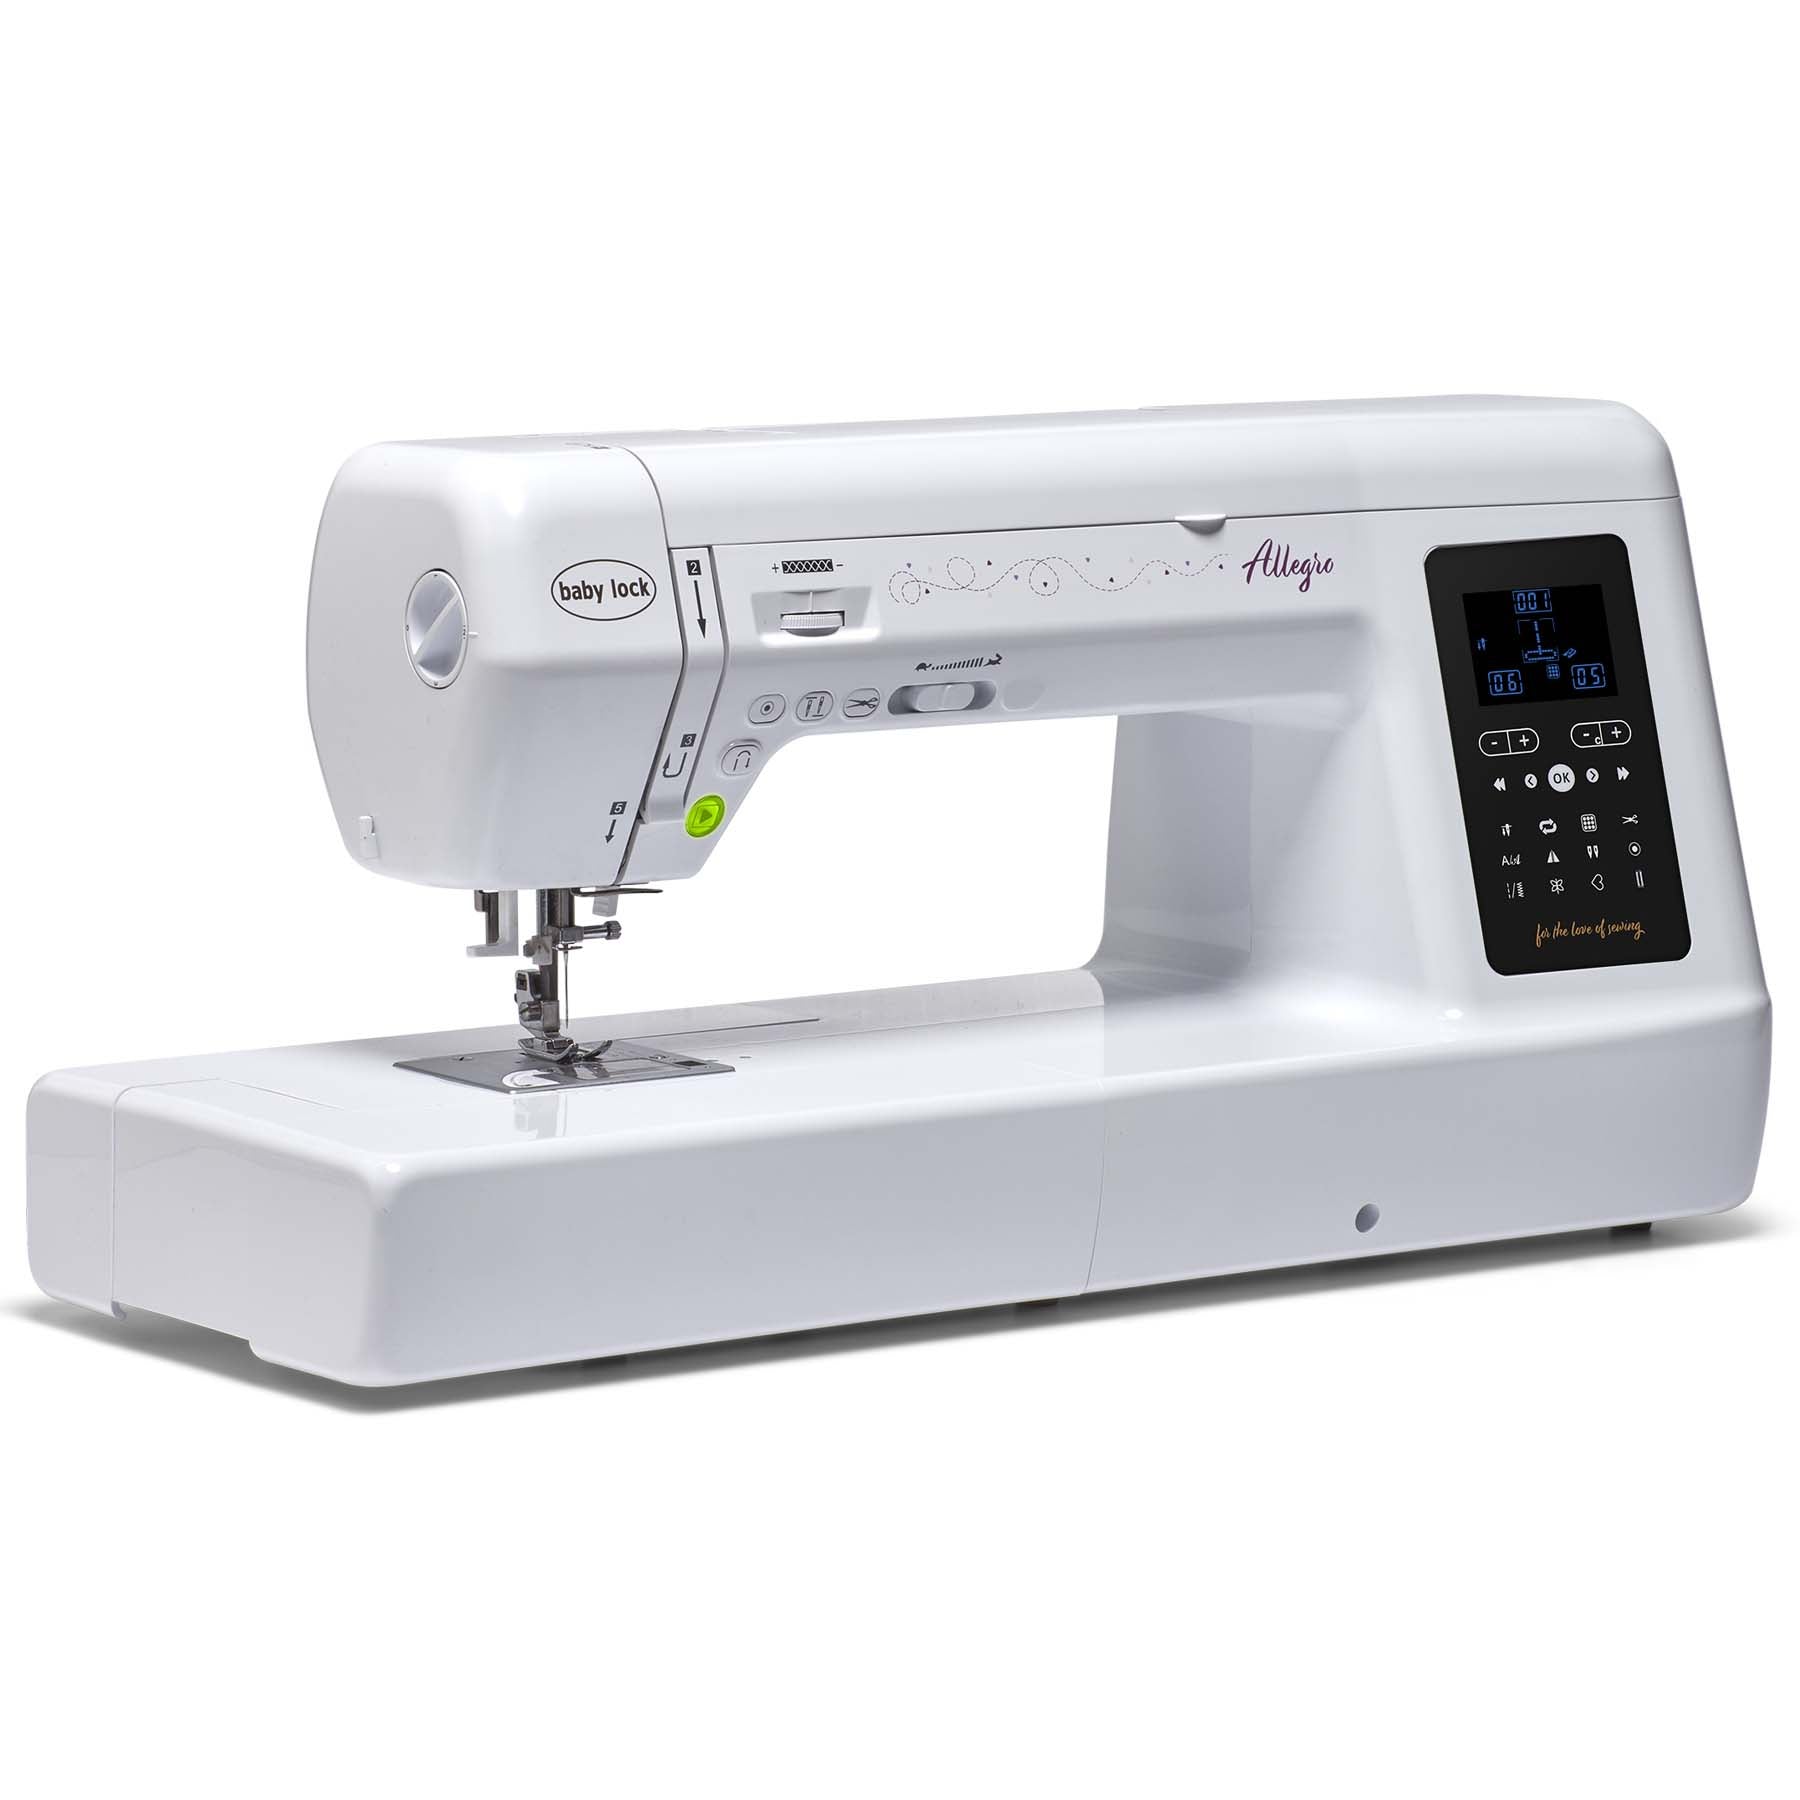 Baby Lock Allegro Sewing and Quilting Machine